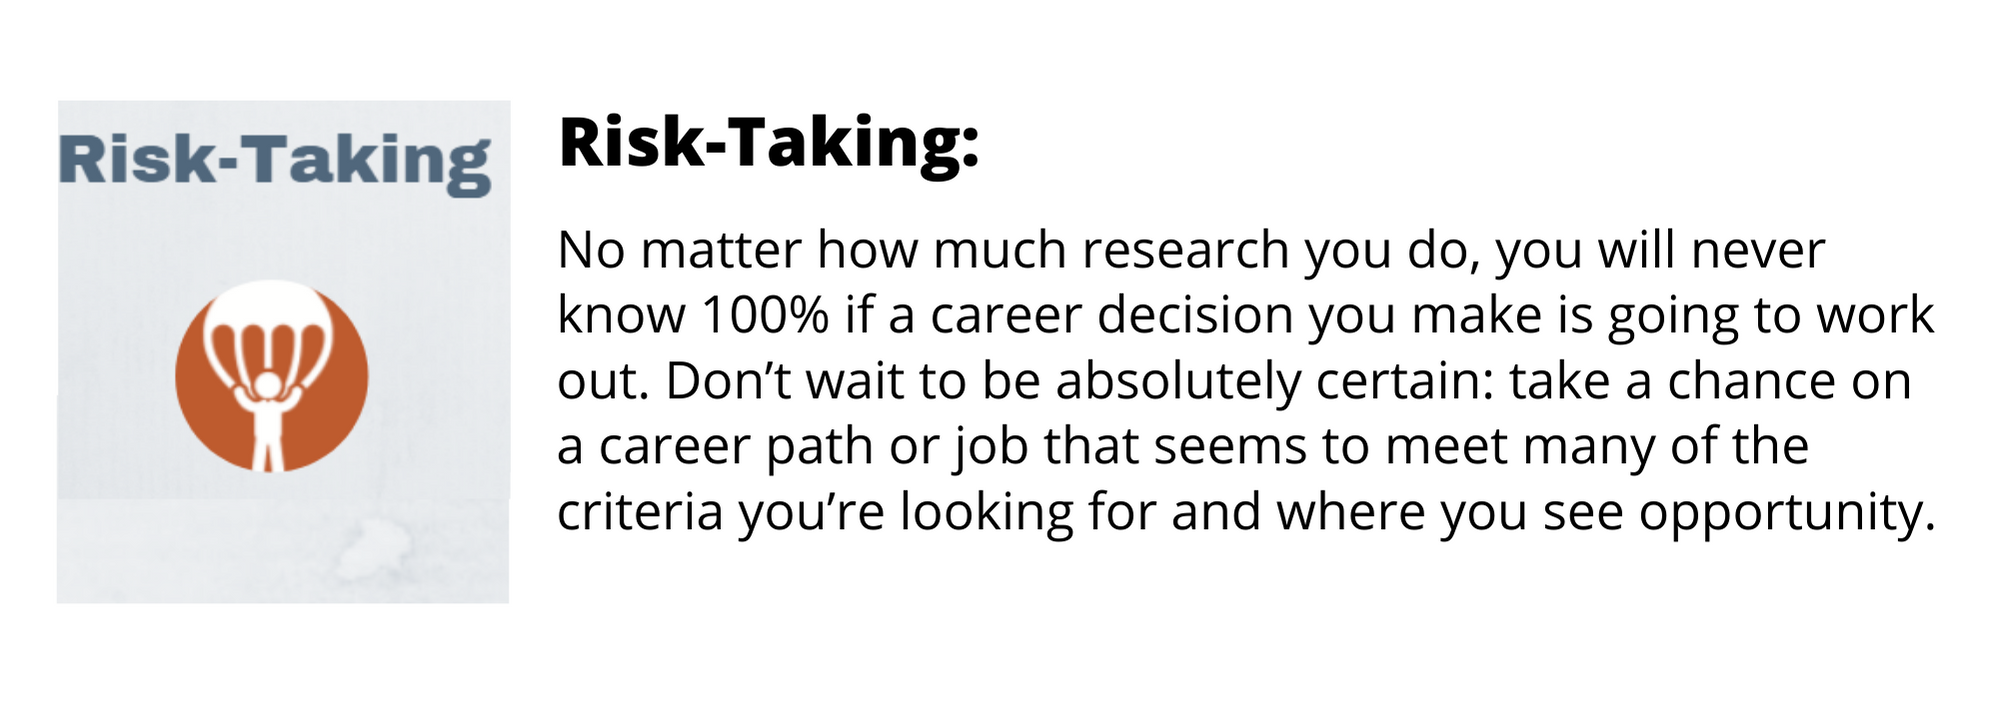 No matter how much research you do, you will never know 100% if a career decision you make is going to work out. Don’t wait to be absolutely certain: take a chance on a career path or job that seems to meet many of the criteria you’re looking for and where you see opportunity.